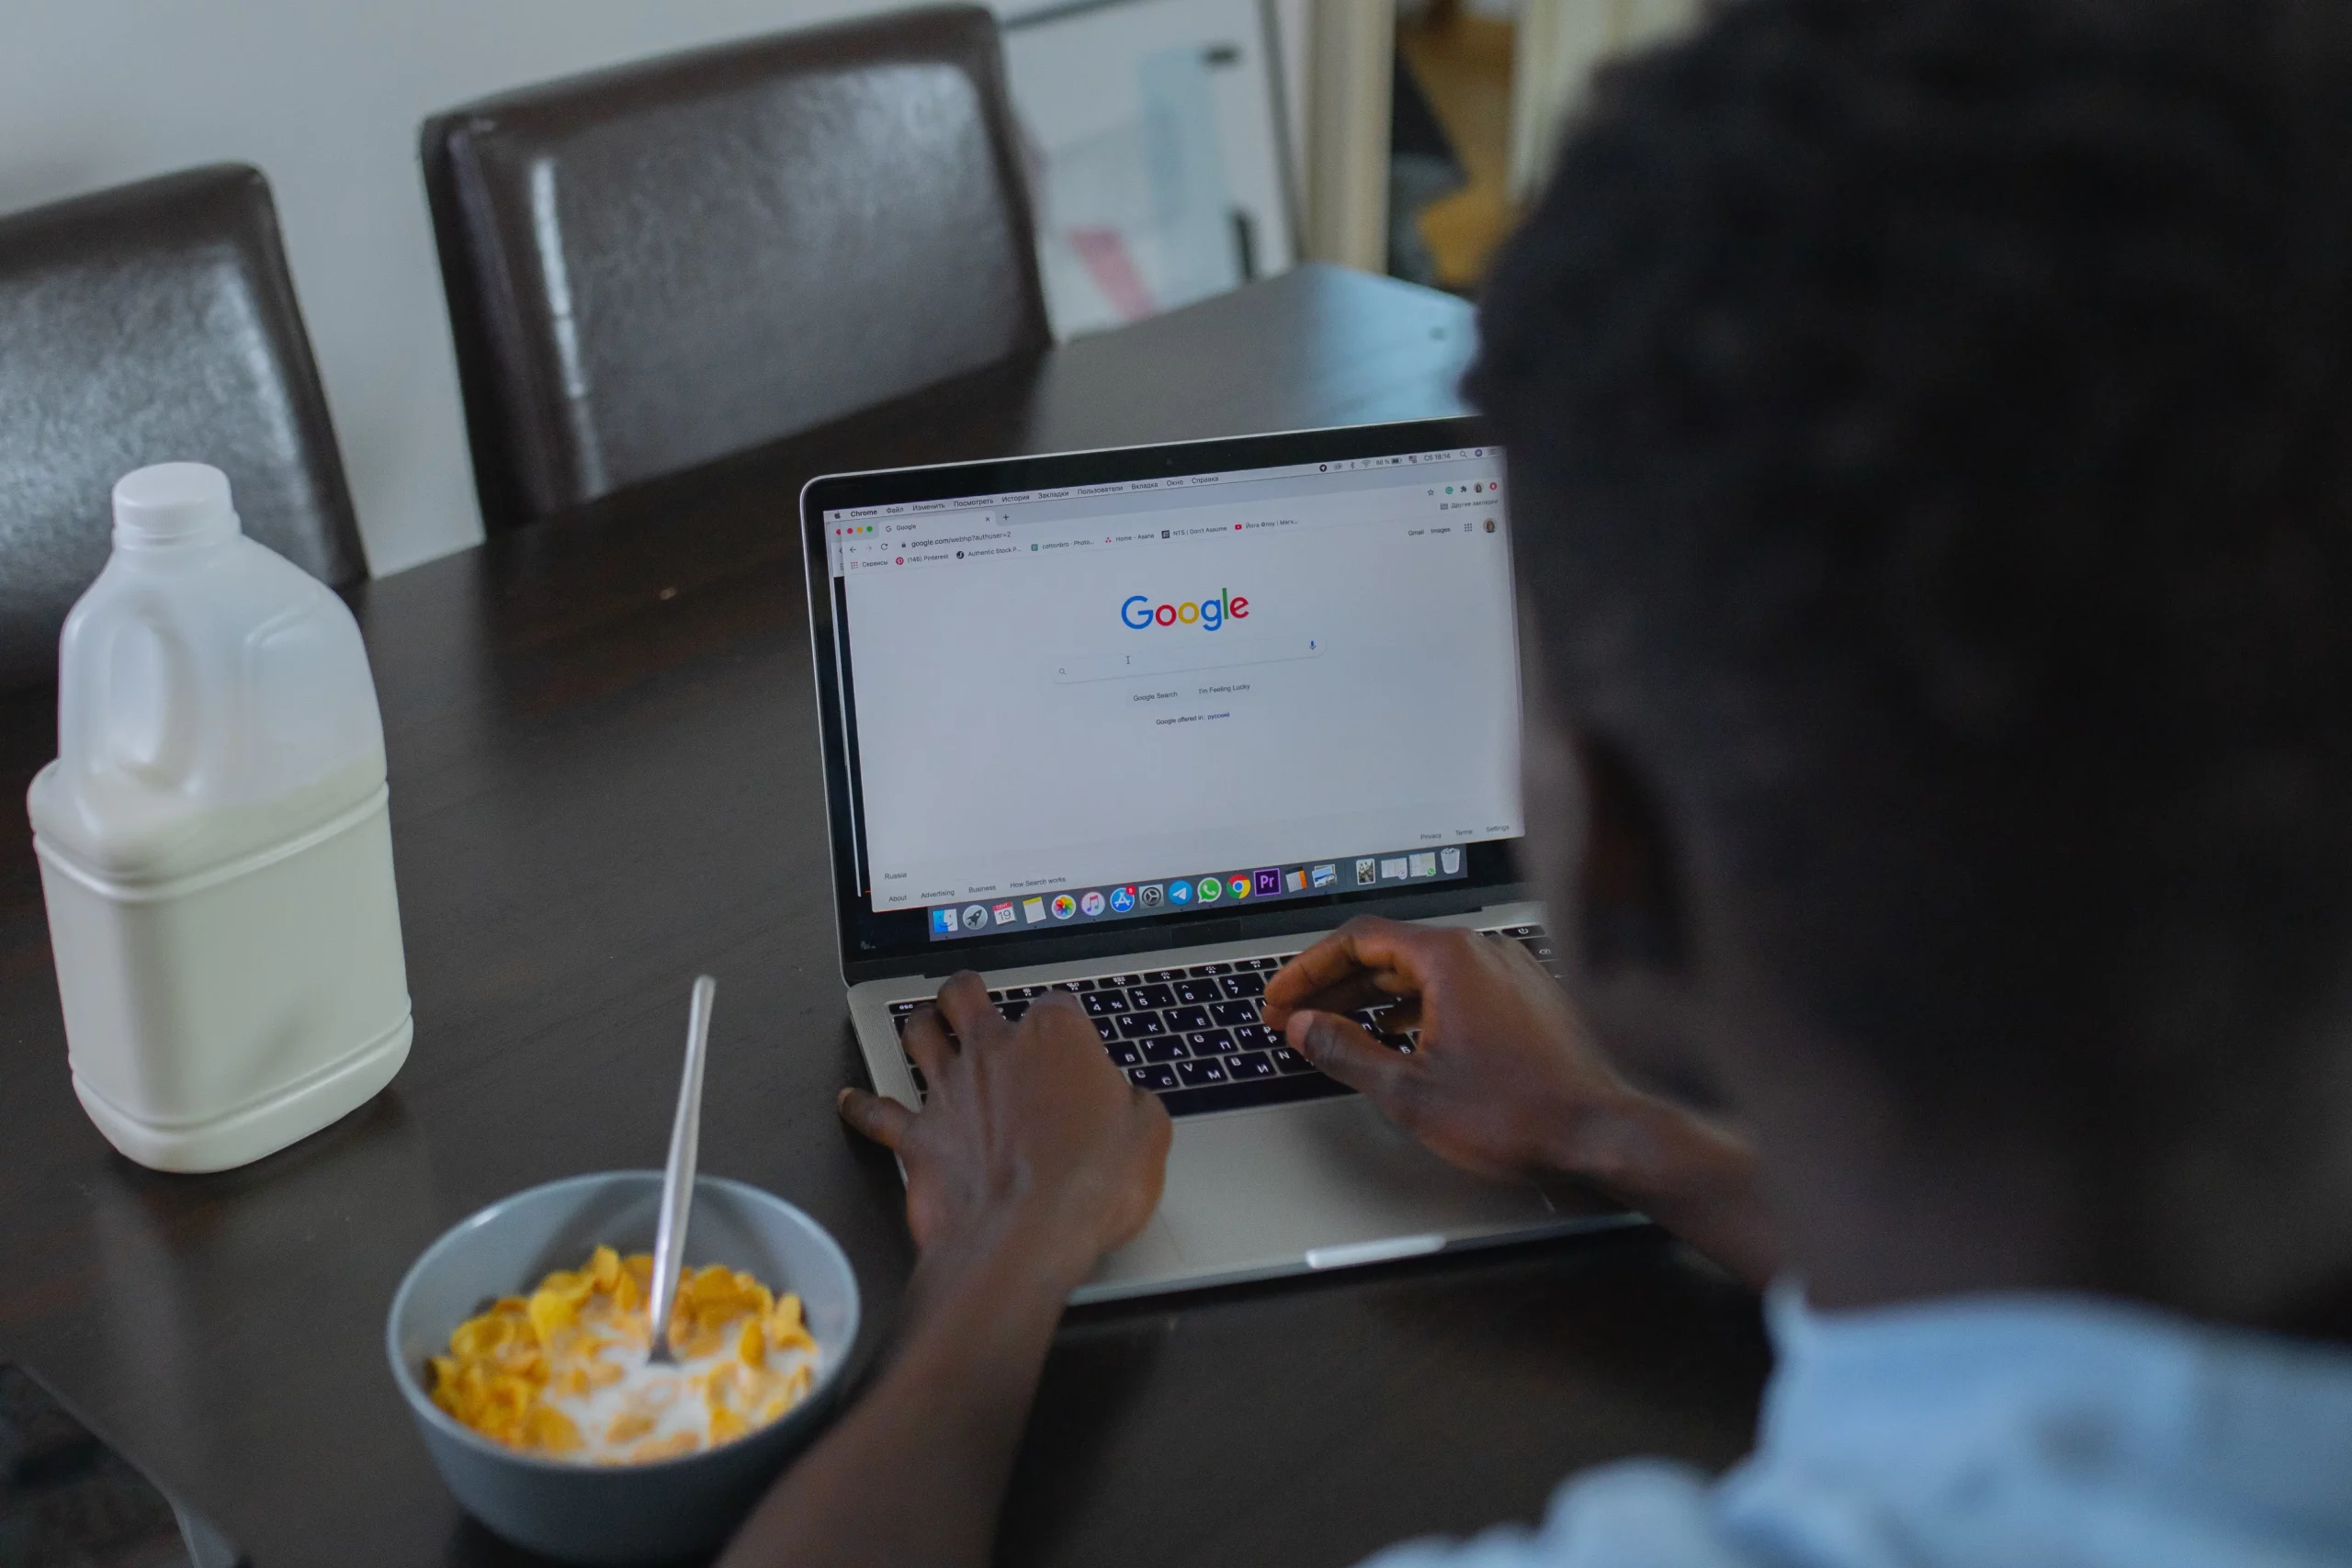 A man working on his laptop computer while eating cereal. The laptop screen shows a Google Ads conversion campaign